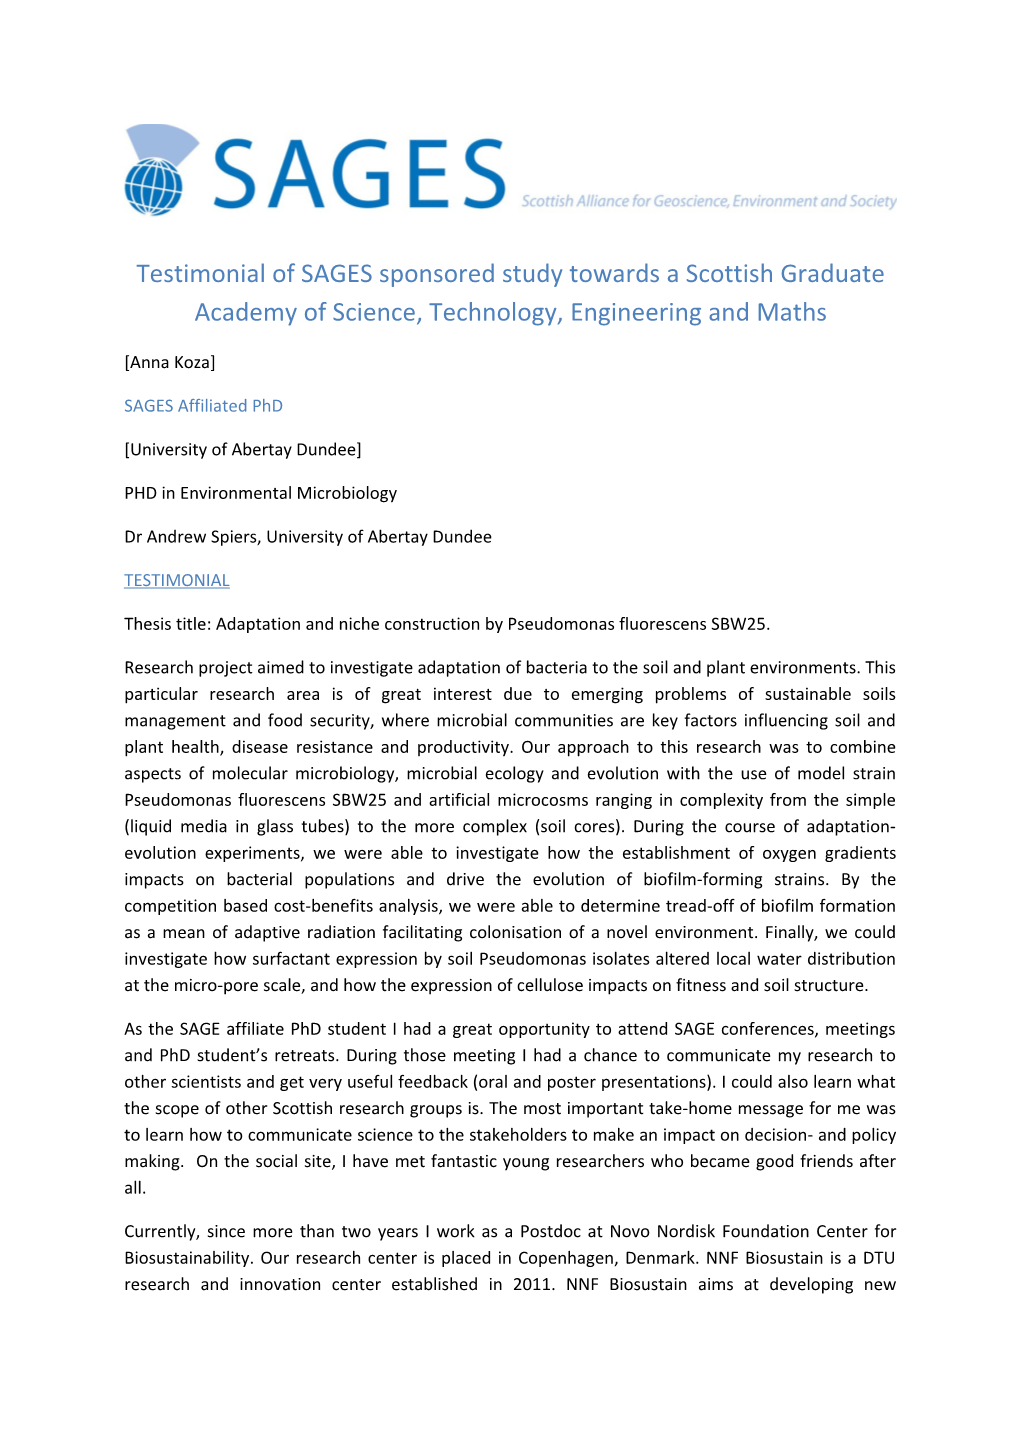 Testimonial of SAGES Sponsored Study Towards a Scottish Graduate Academy of Science, Technology